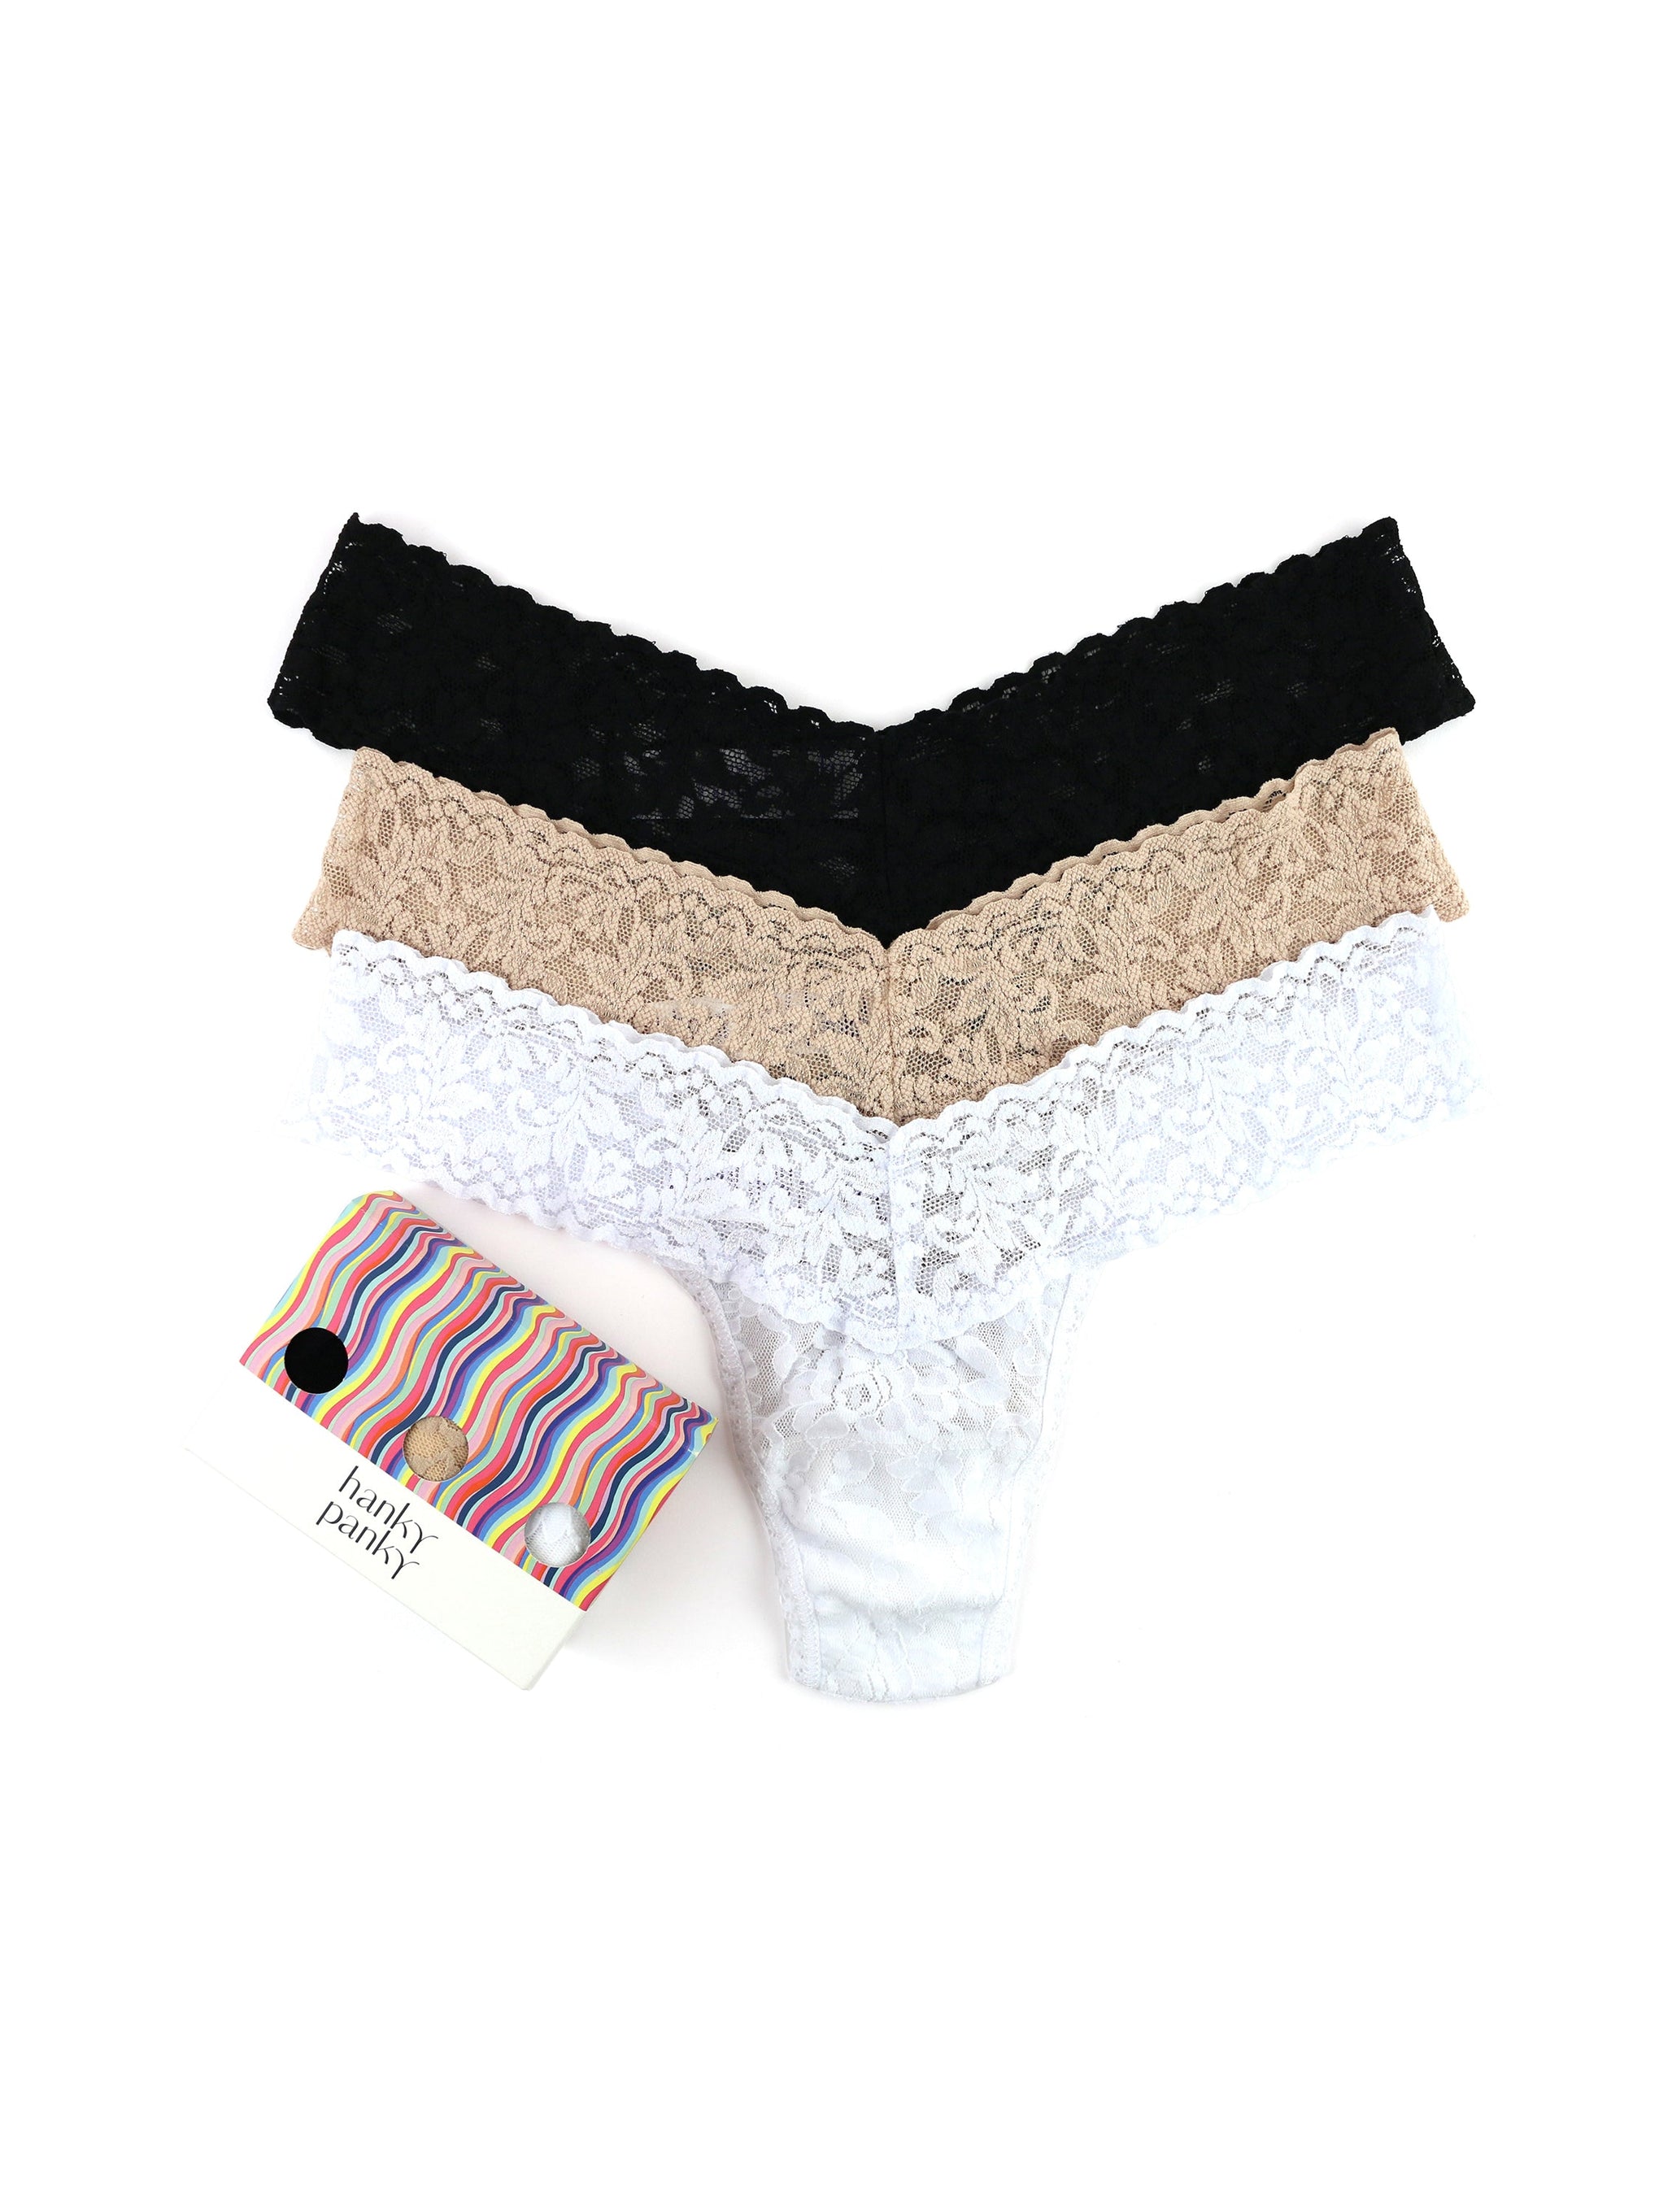  Bride to Be Wedding Day Low-Rise Thong Panty Pack